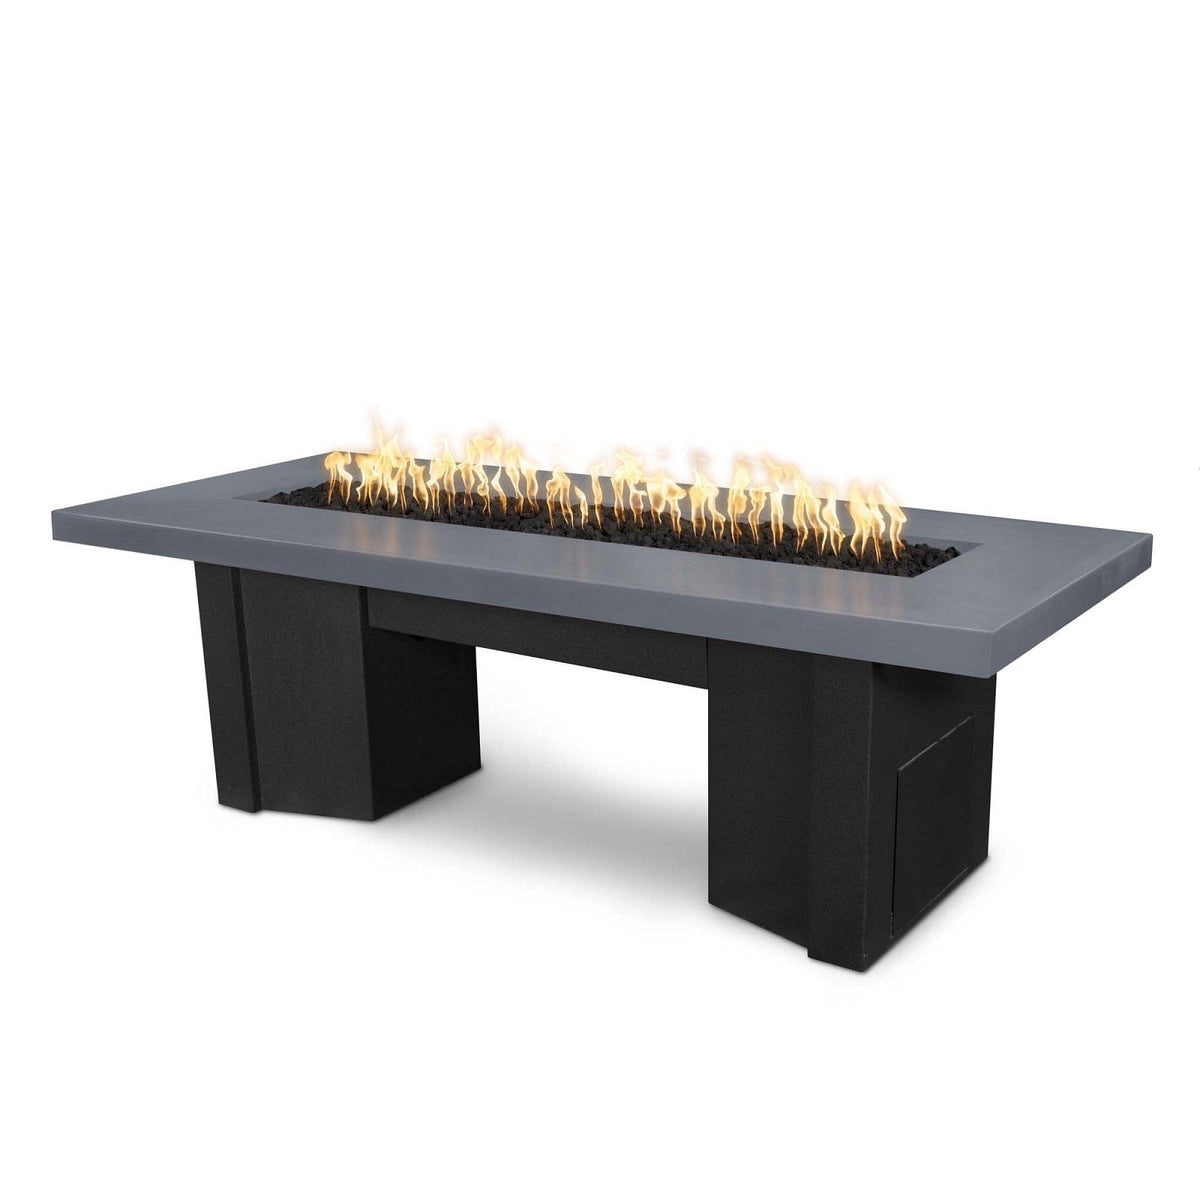 The Outdoor Plus Fire Features Gray (-GRY) / Black Powder Coated Steel (-BLK) The Outdoor Plus 60&quot; Alameda Fire Table Smooth Concrete in Liquid Propane - Flame Sense System with Push Button Spark Igniter / OPT-ALMGFRC60FSEN-LP